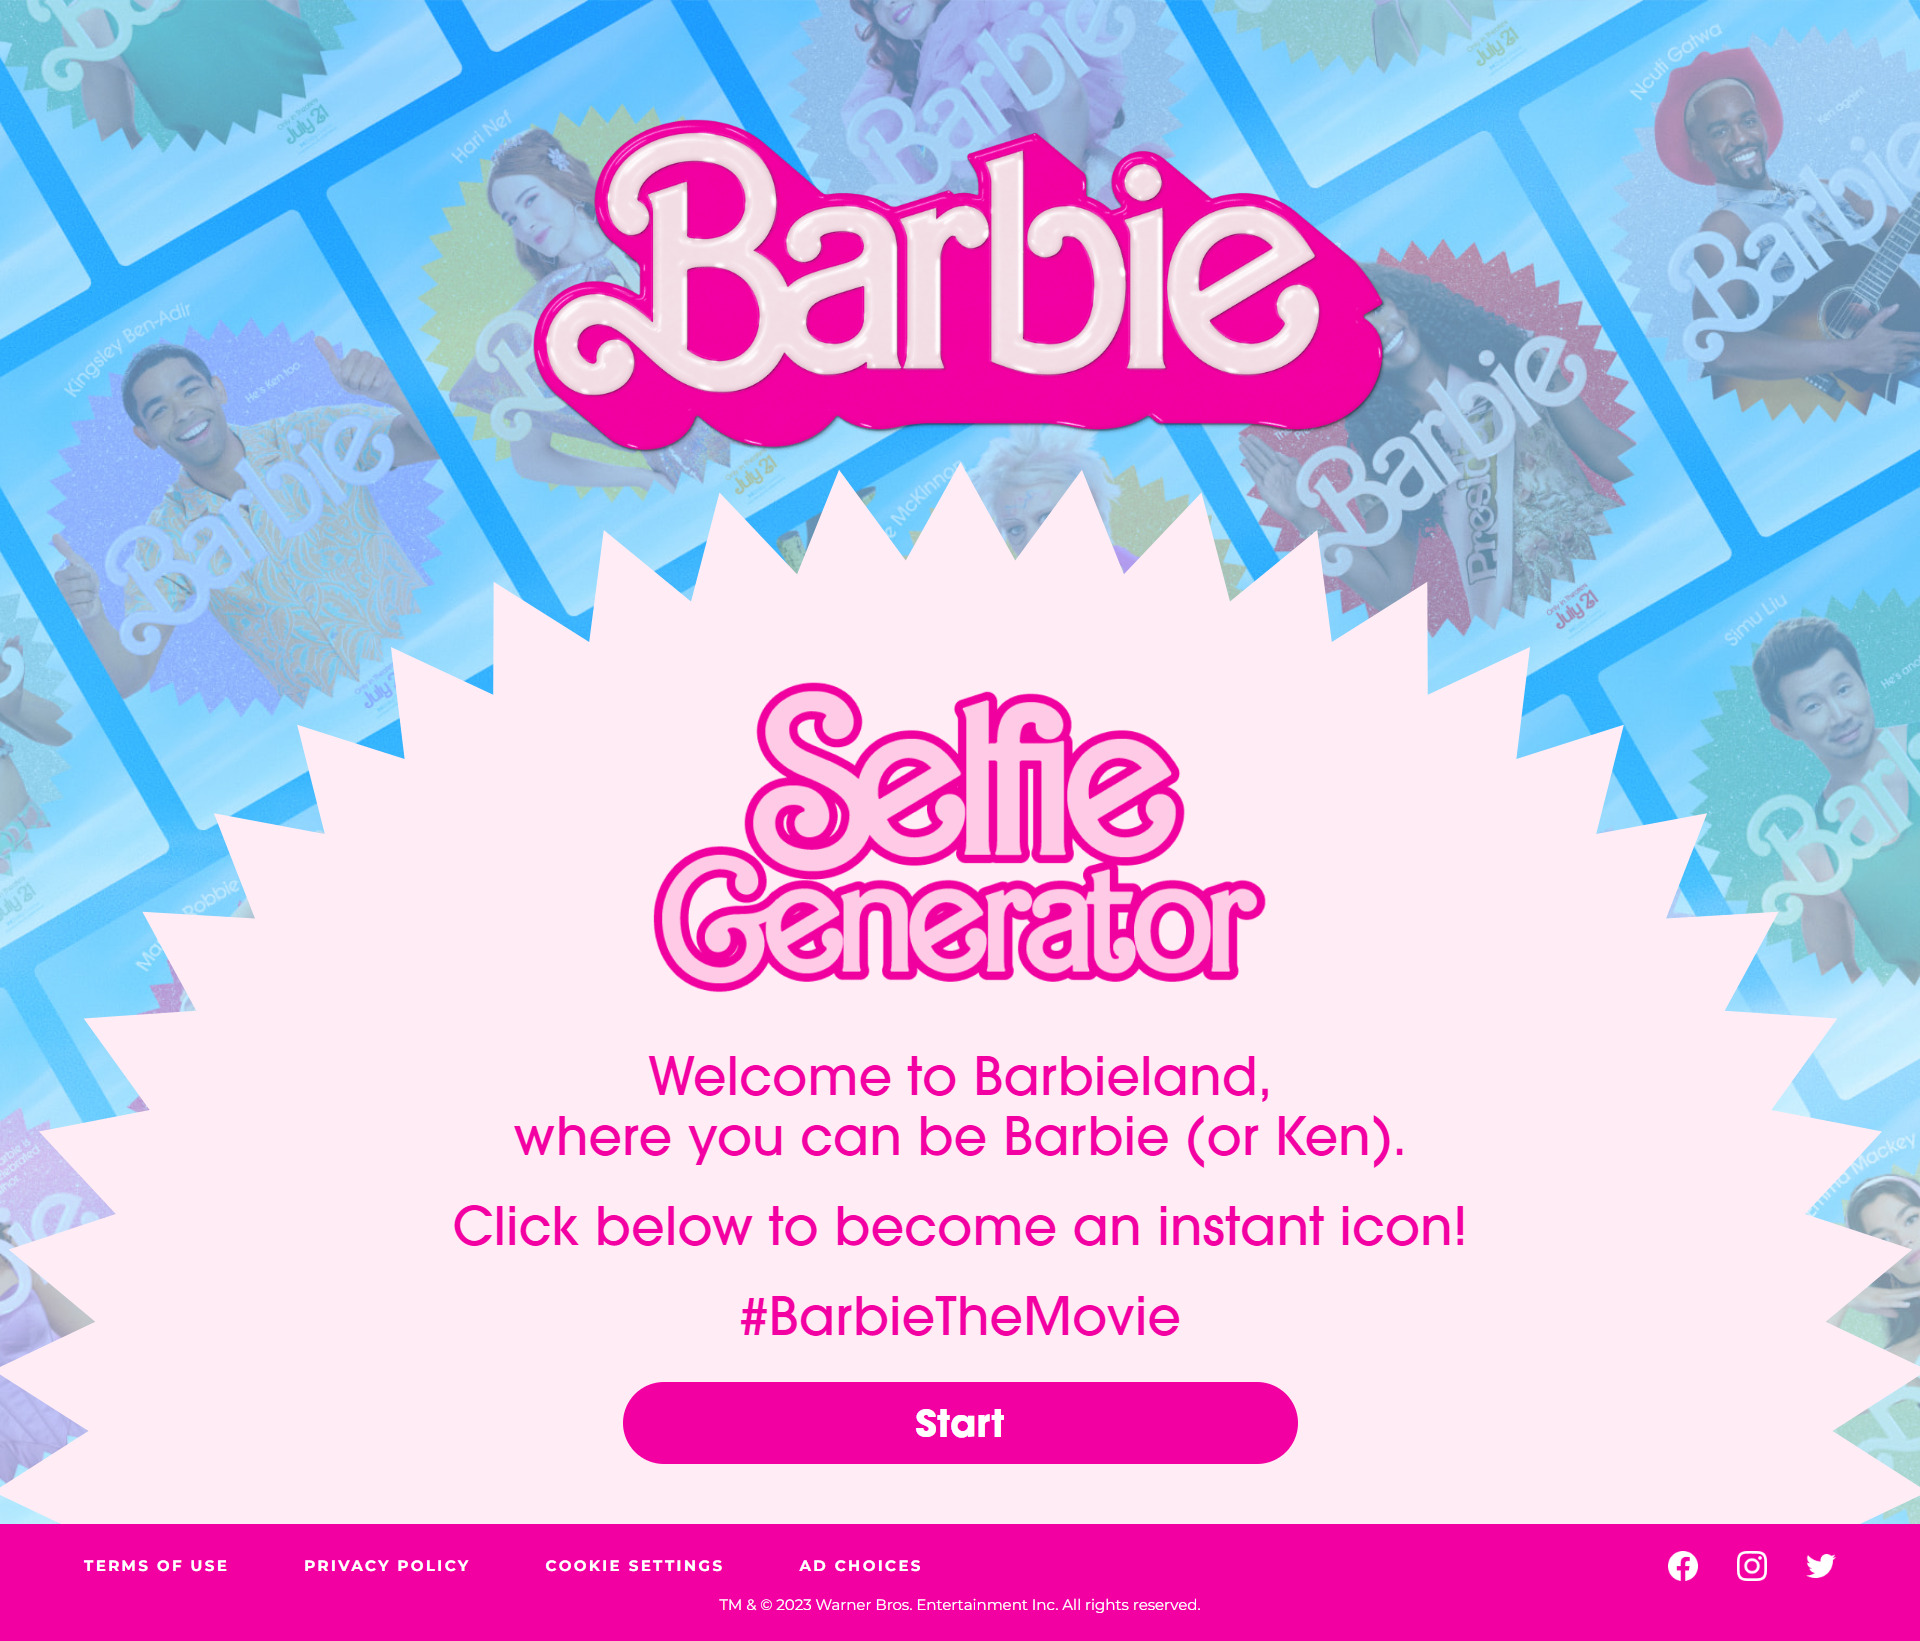 How To Make Your Own Barbie Poster Barbie Selfie Generator Meme Template